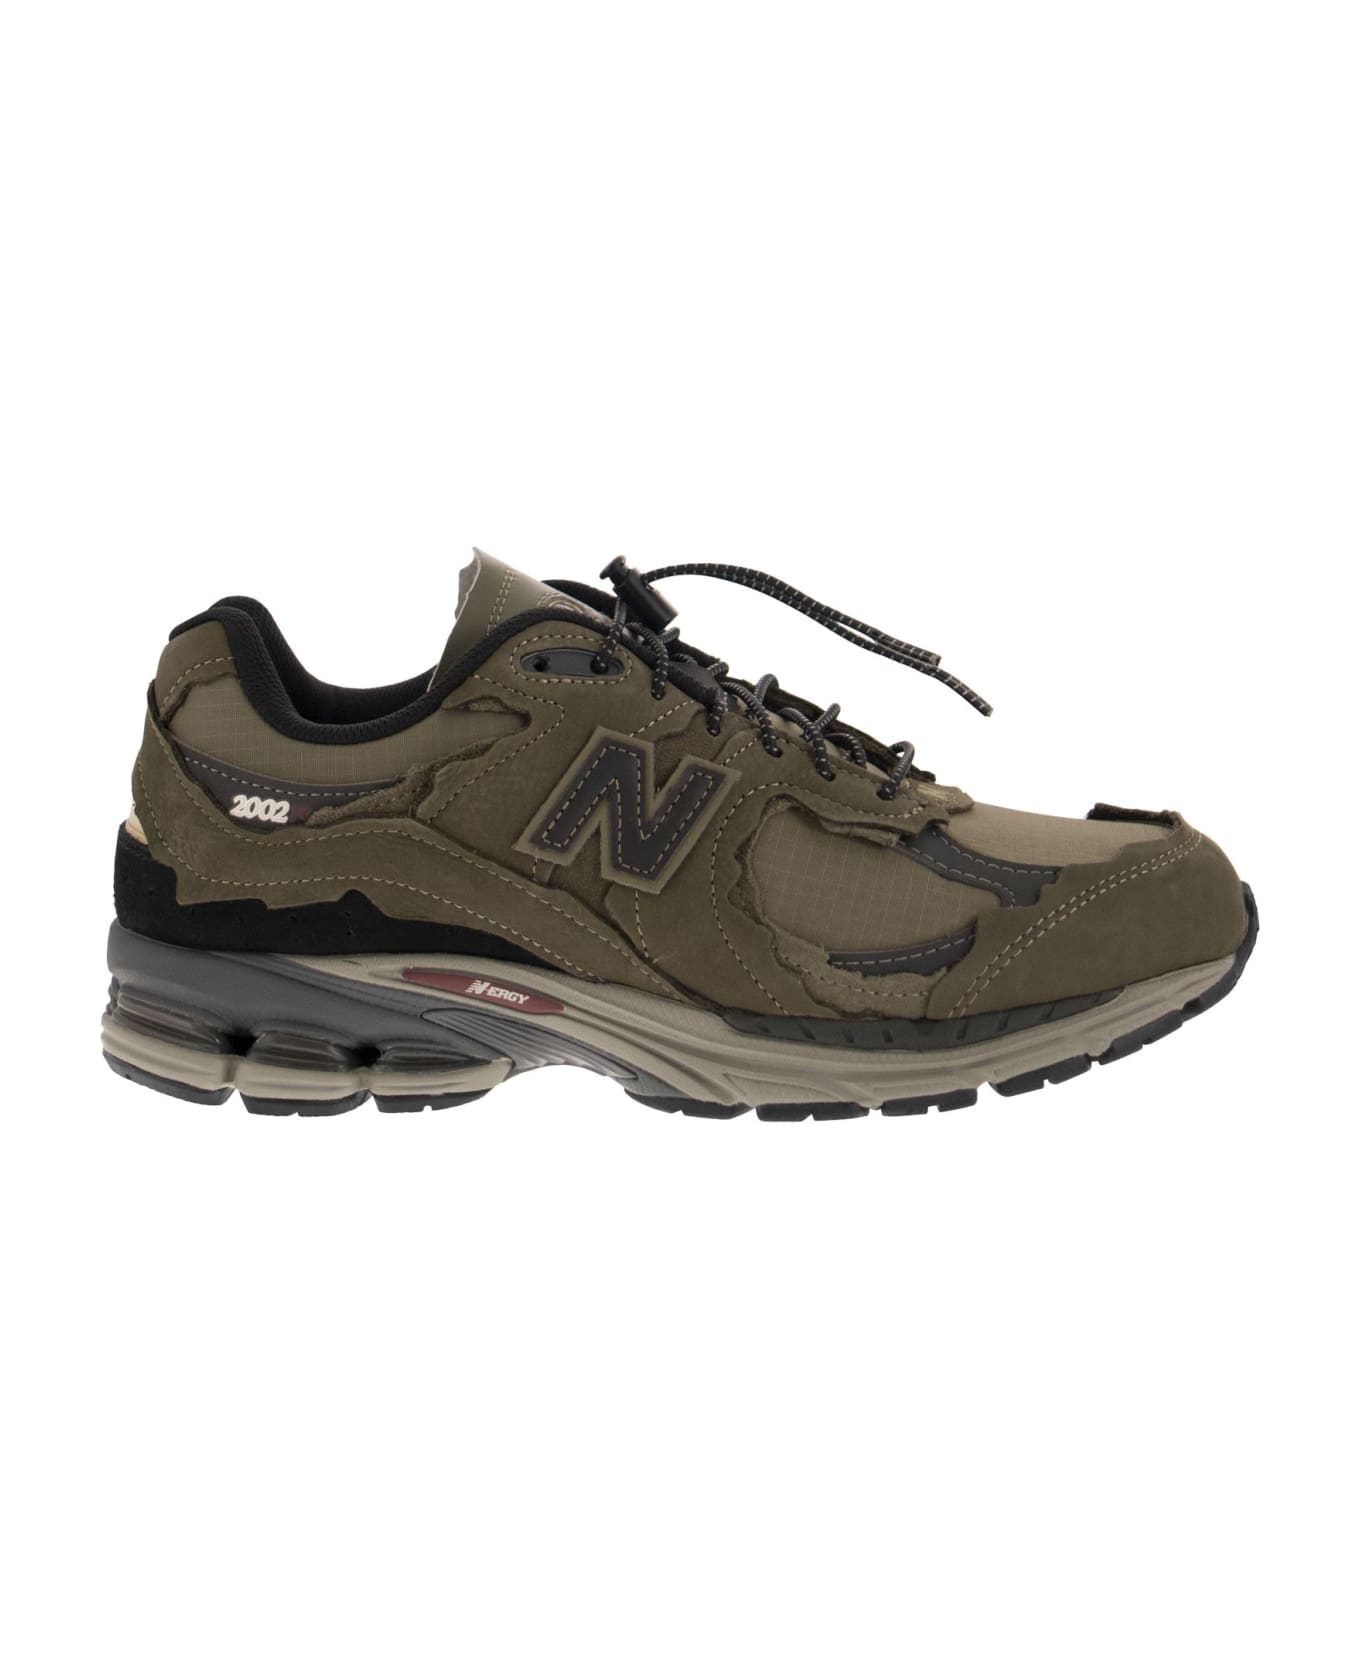 New Balance 2002 - Sneakers Lifestyle - Military Green